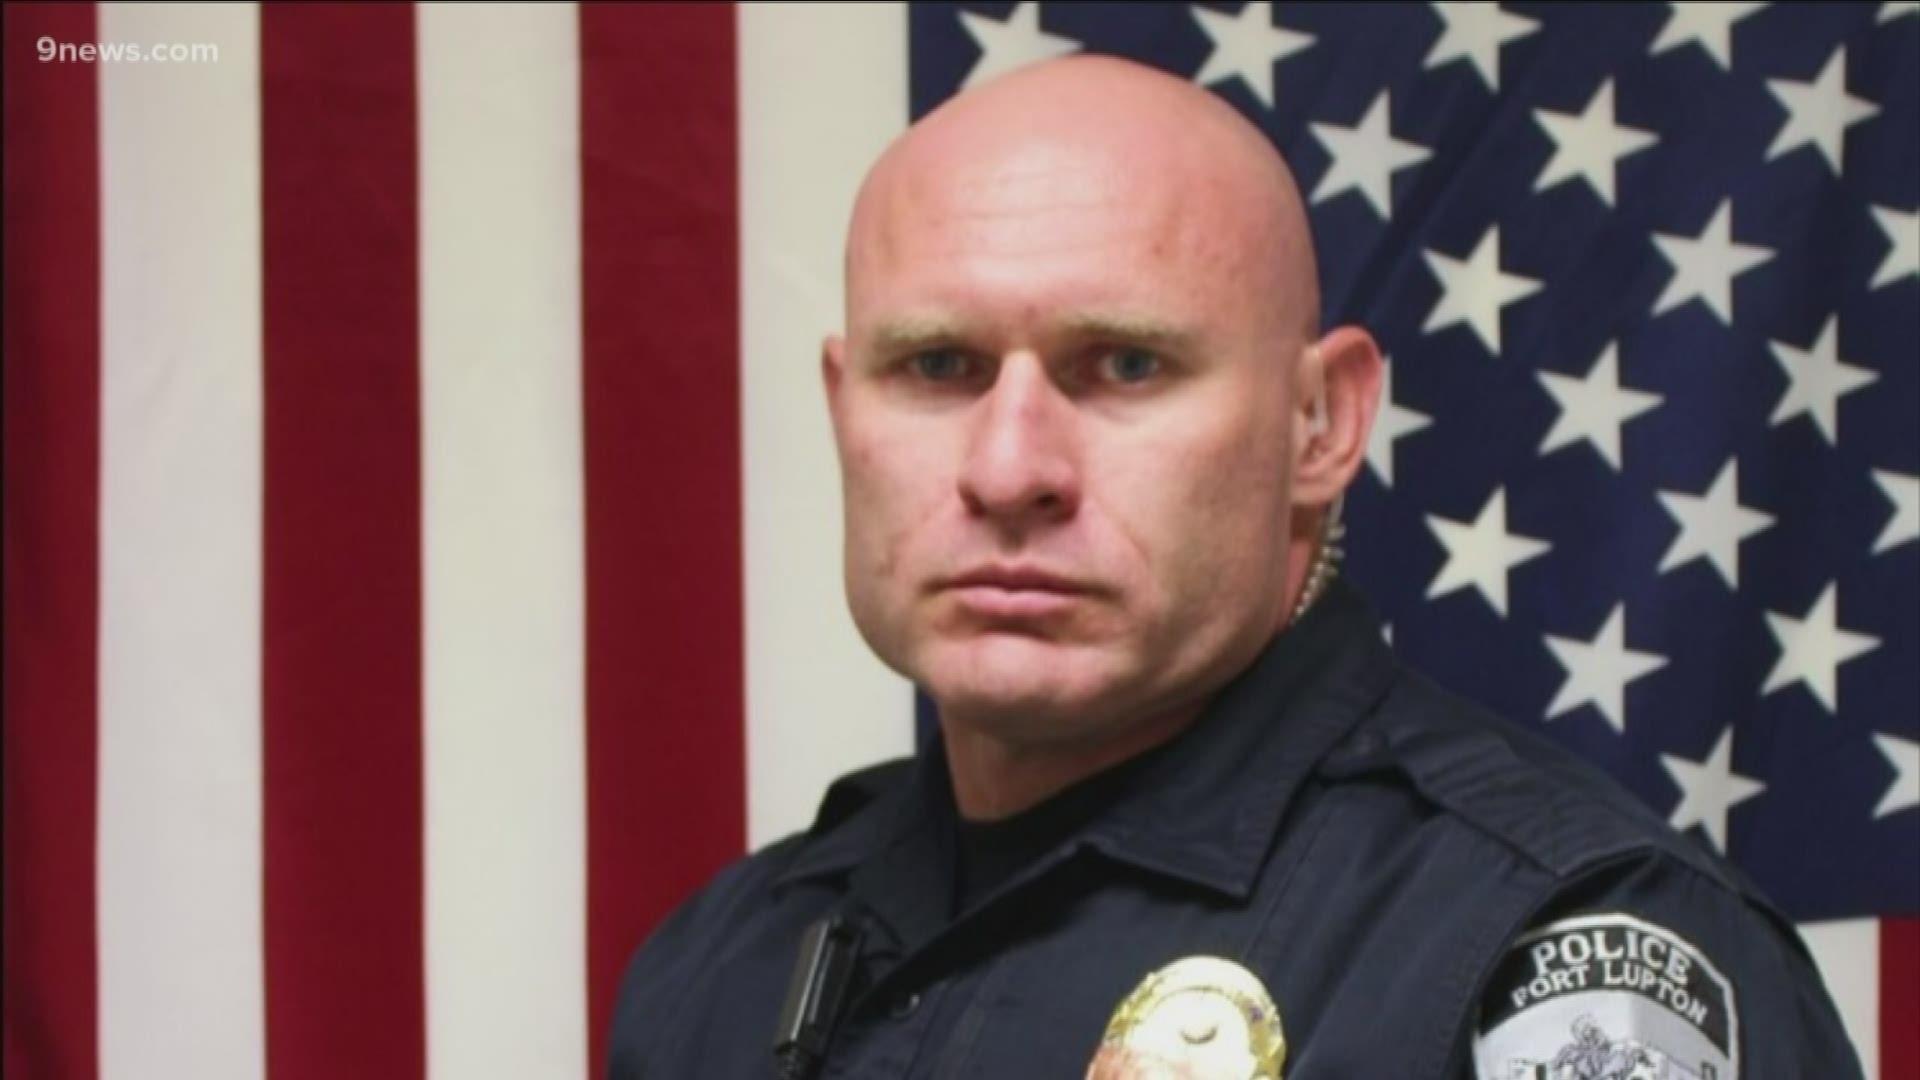 Sergeant Chris Pelton has been moved out of intensive care and has begun mobility therapy.